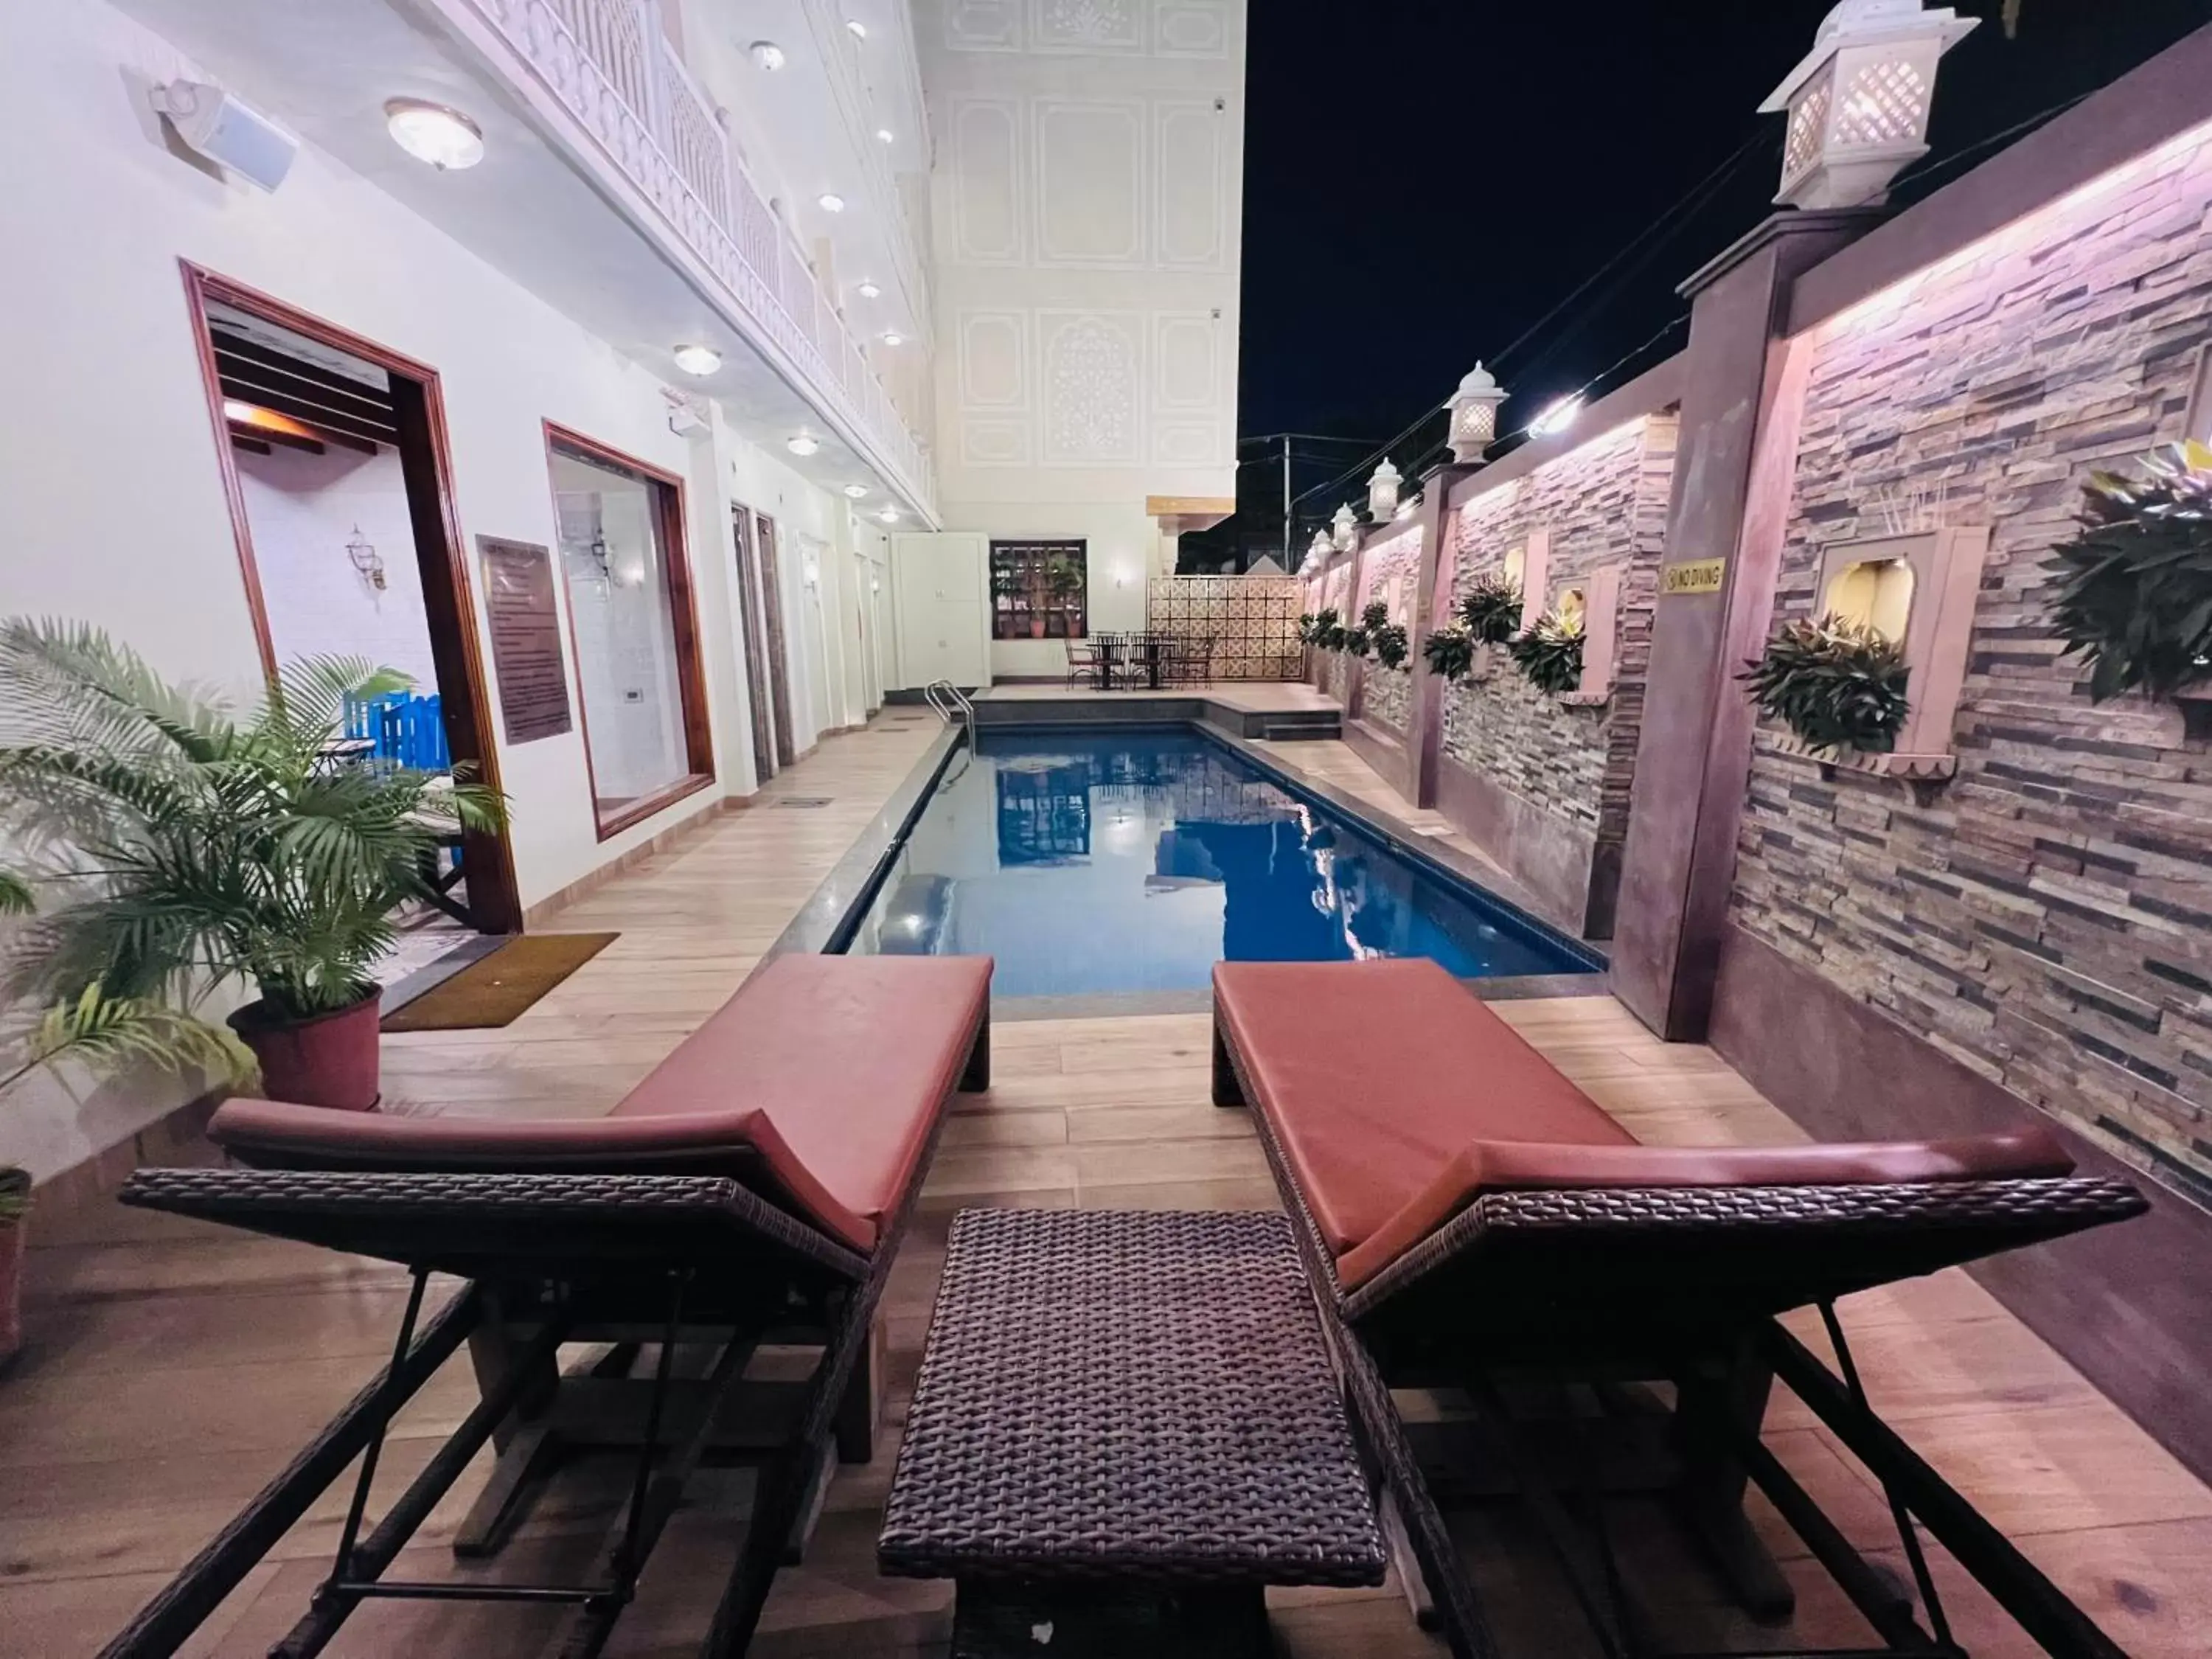 Swimming Pool in Laxmi Palace Heritage Boutique Hotel